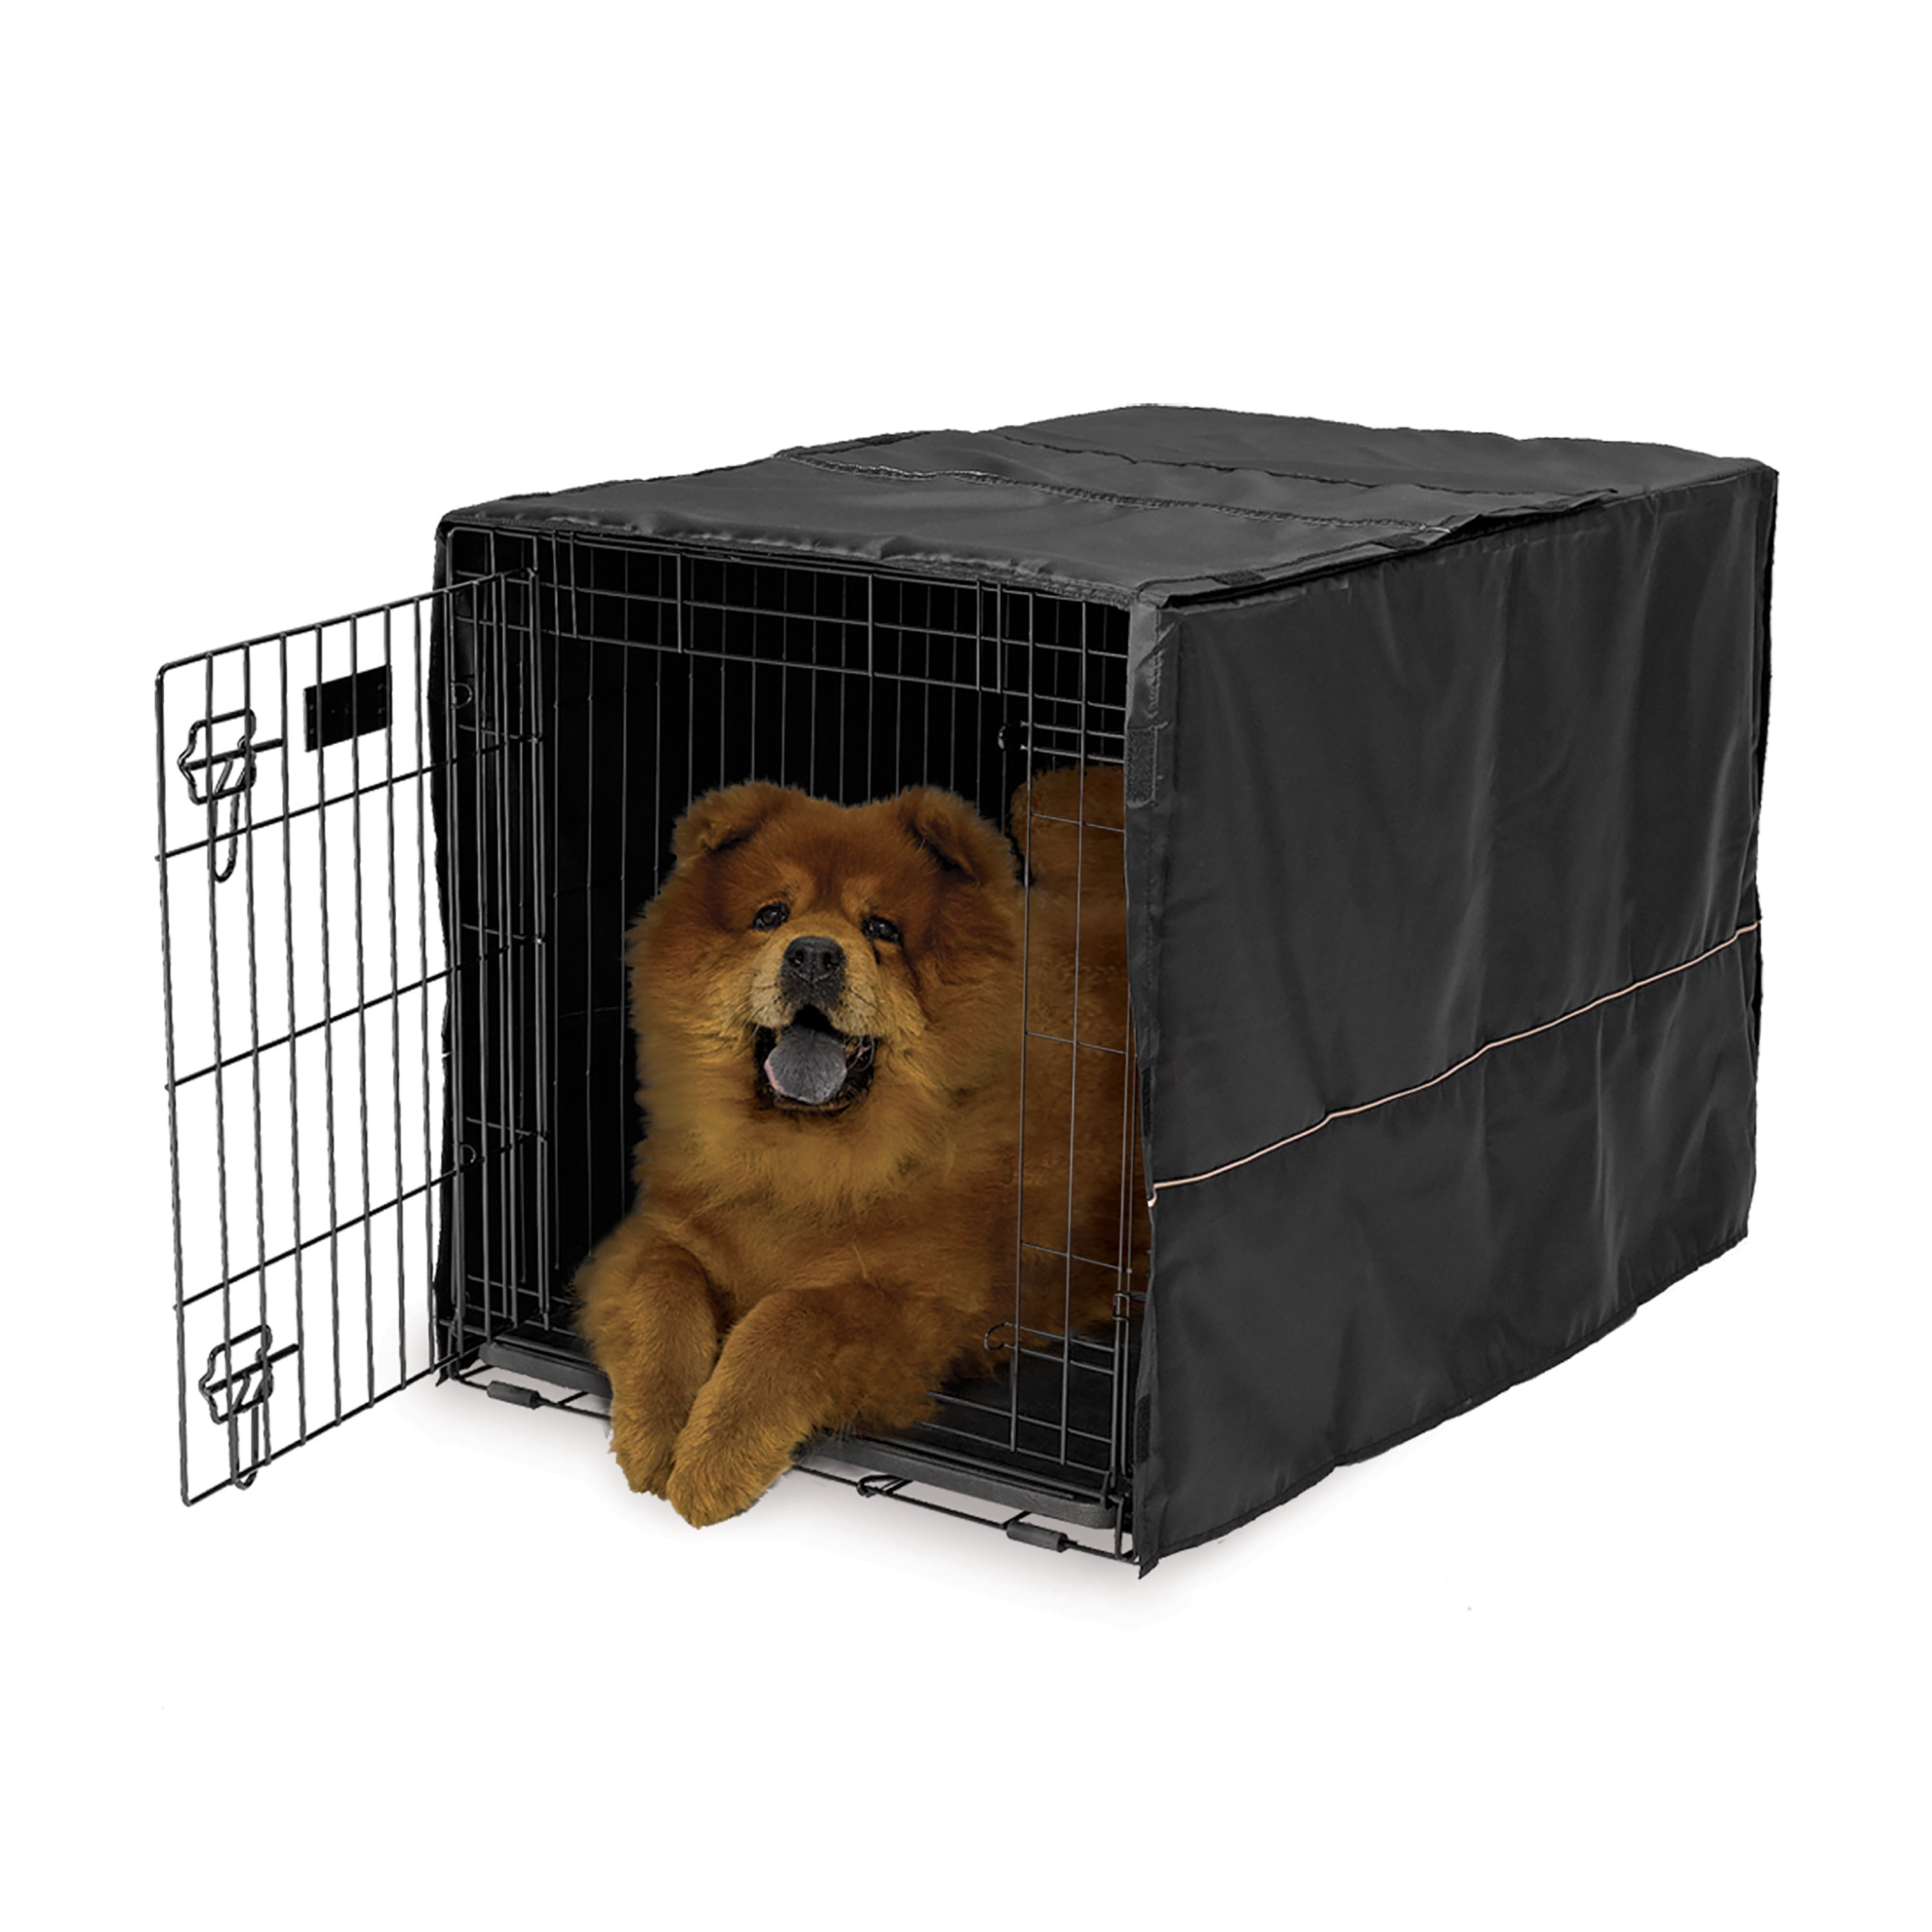 2 3 Door Black Dog Kennel Crate Cover For 36" & 42" Pet Metal Wire Cage With 1 